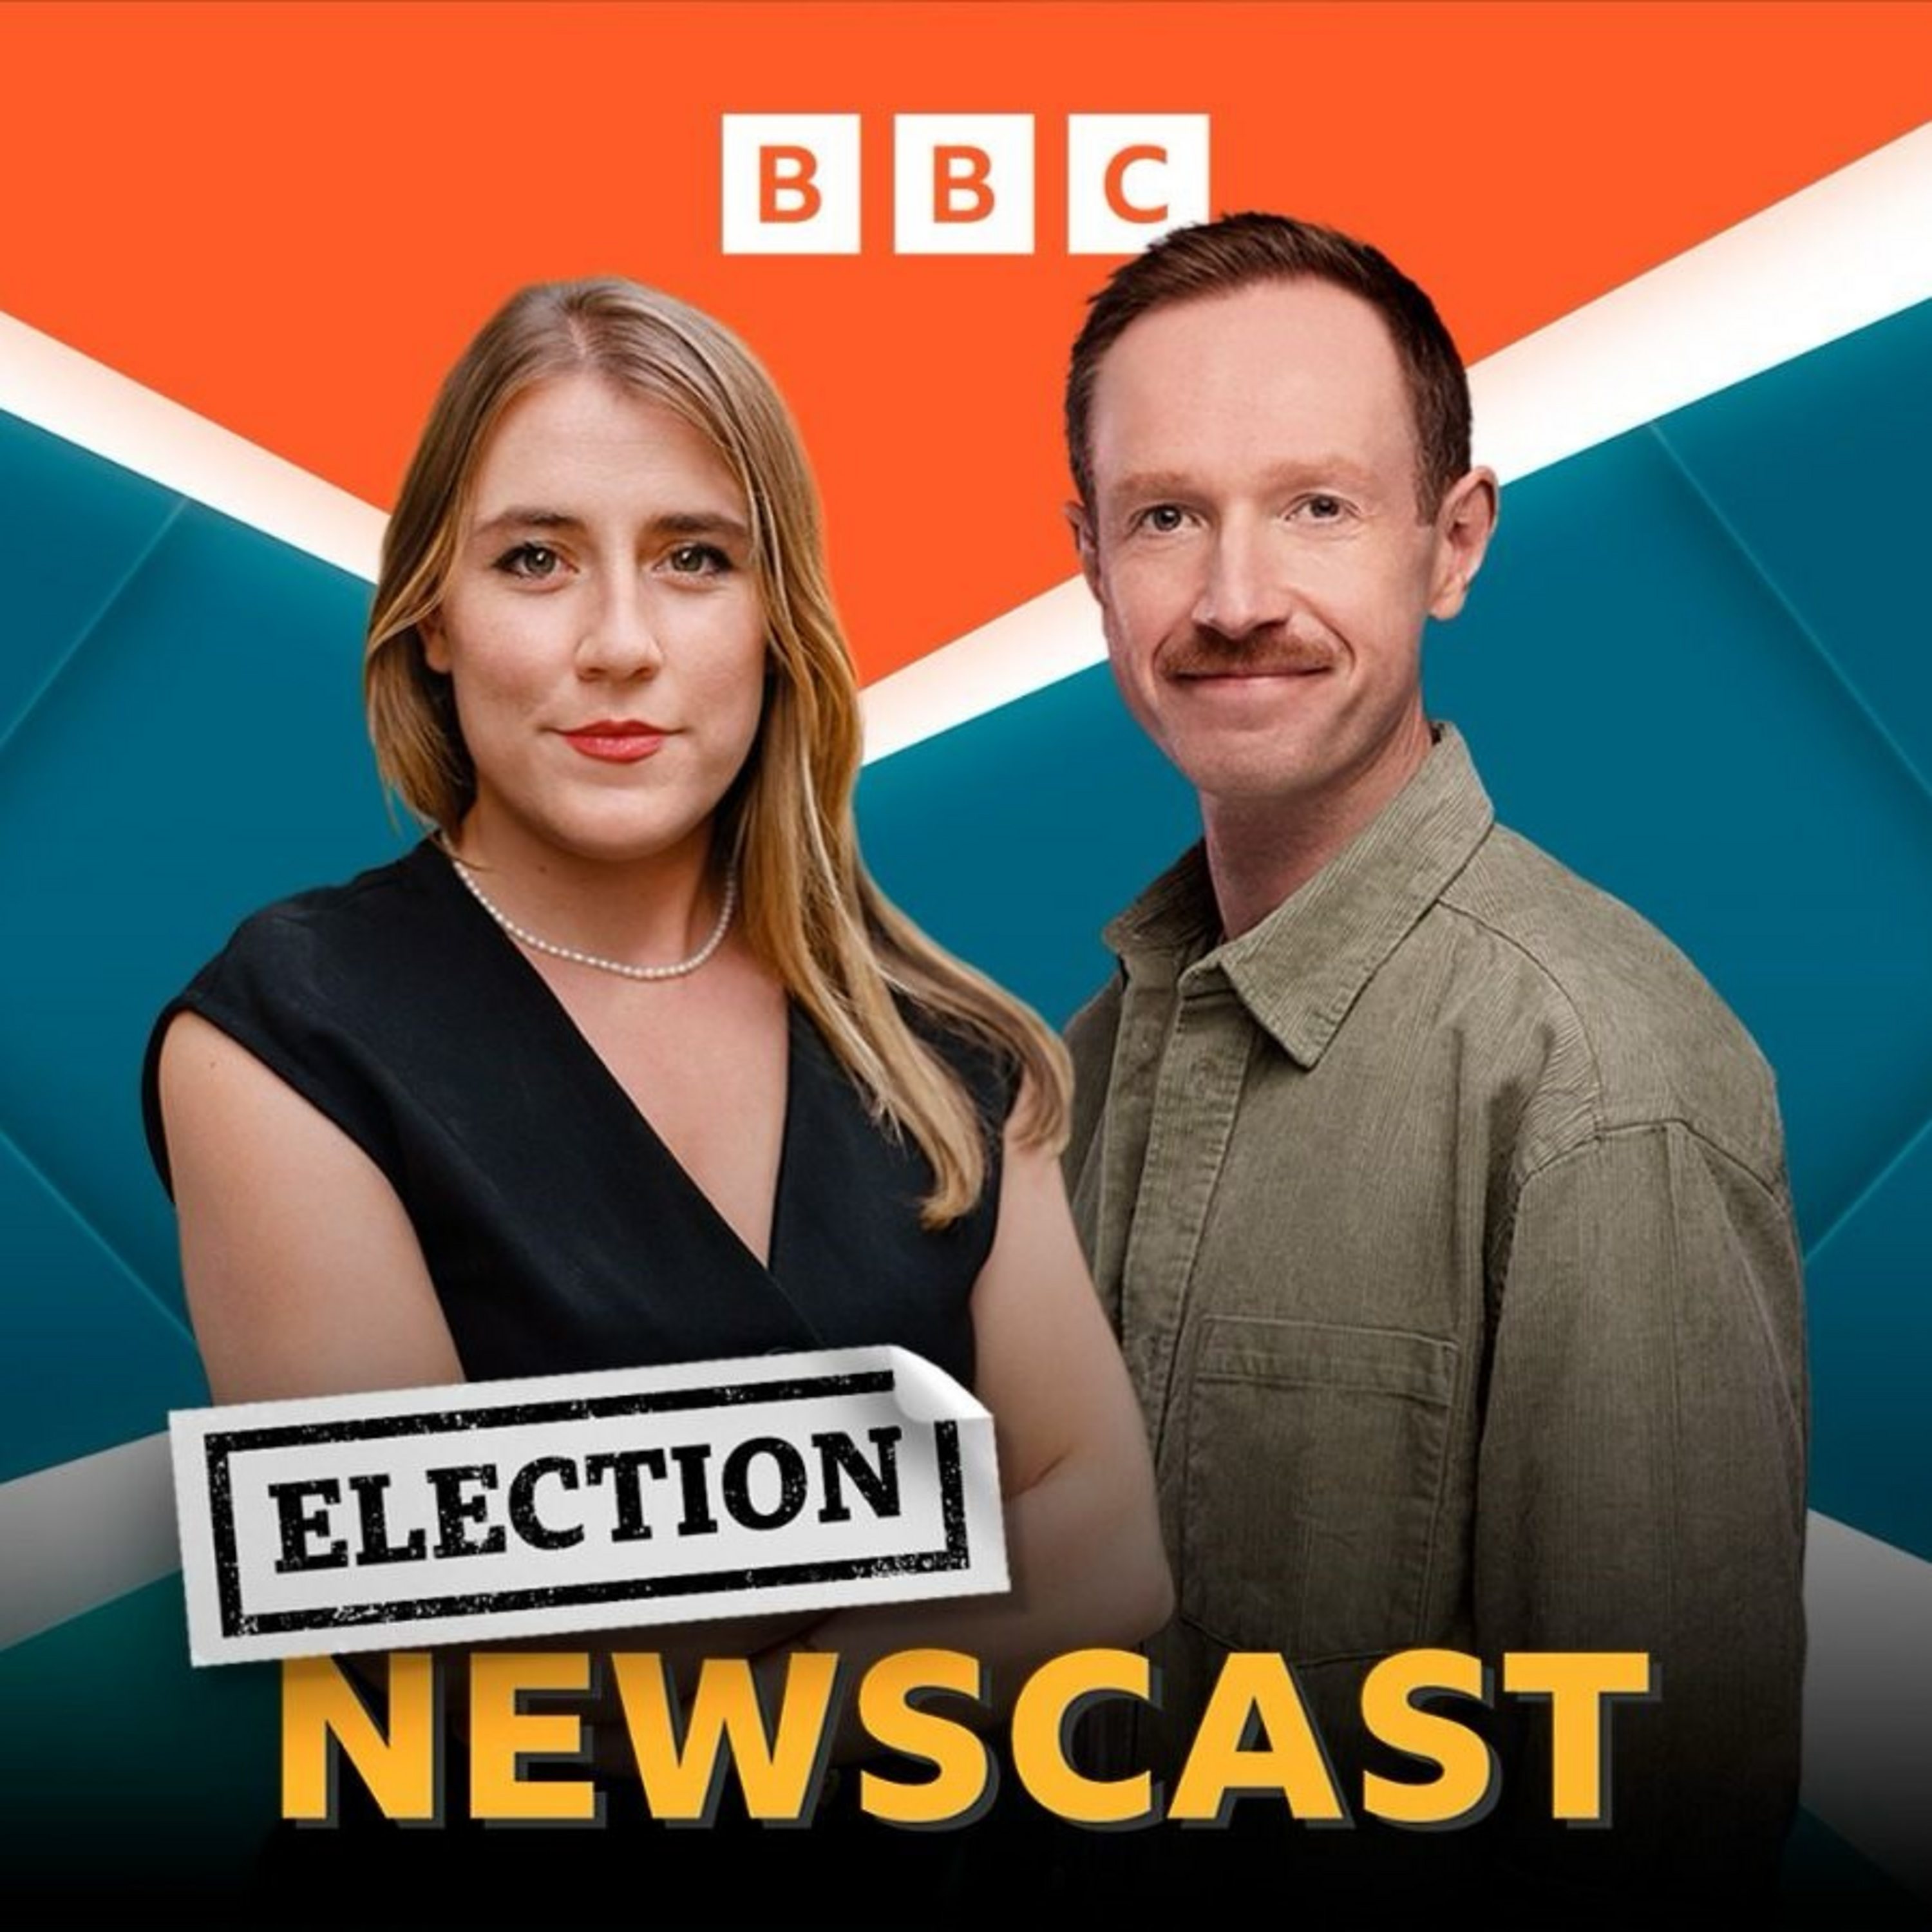 Electioncast: The UK Undercover Voters